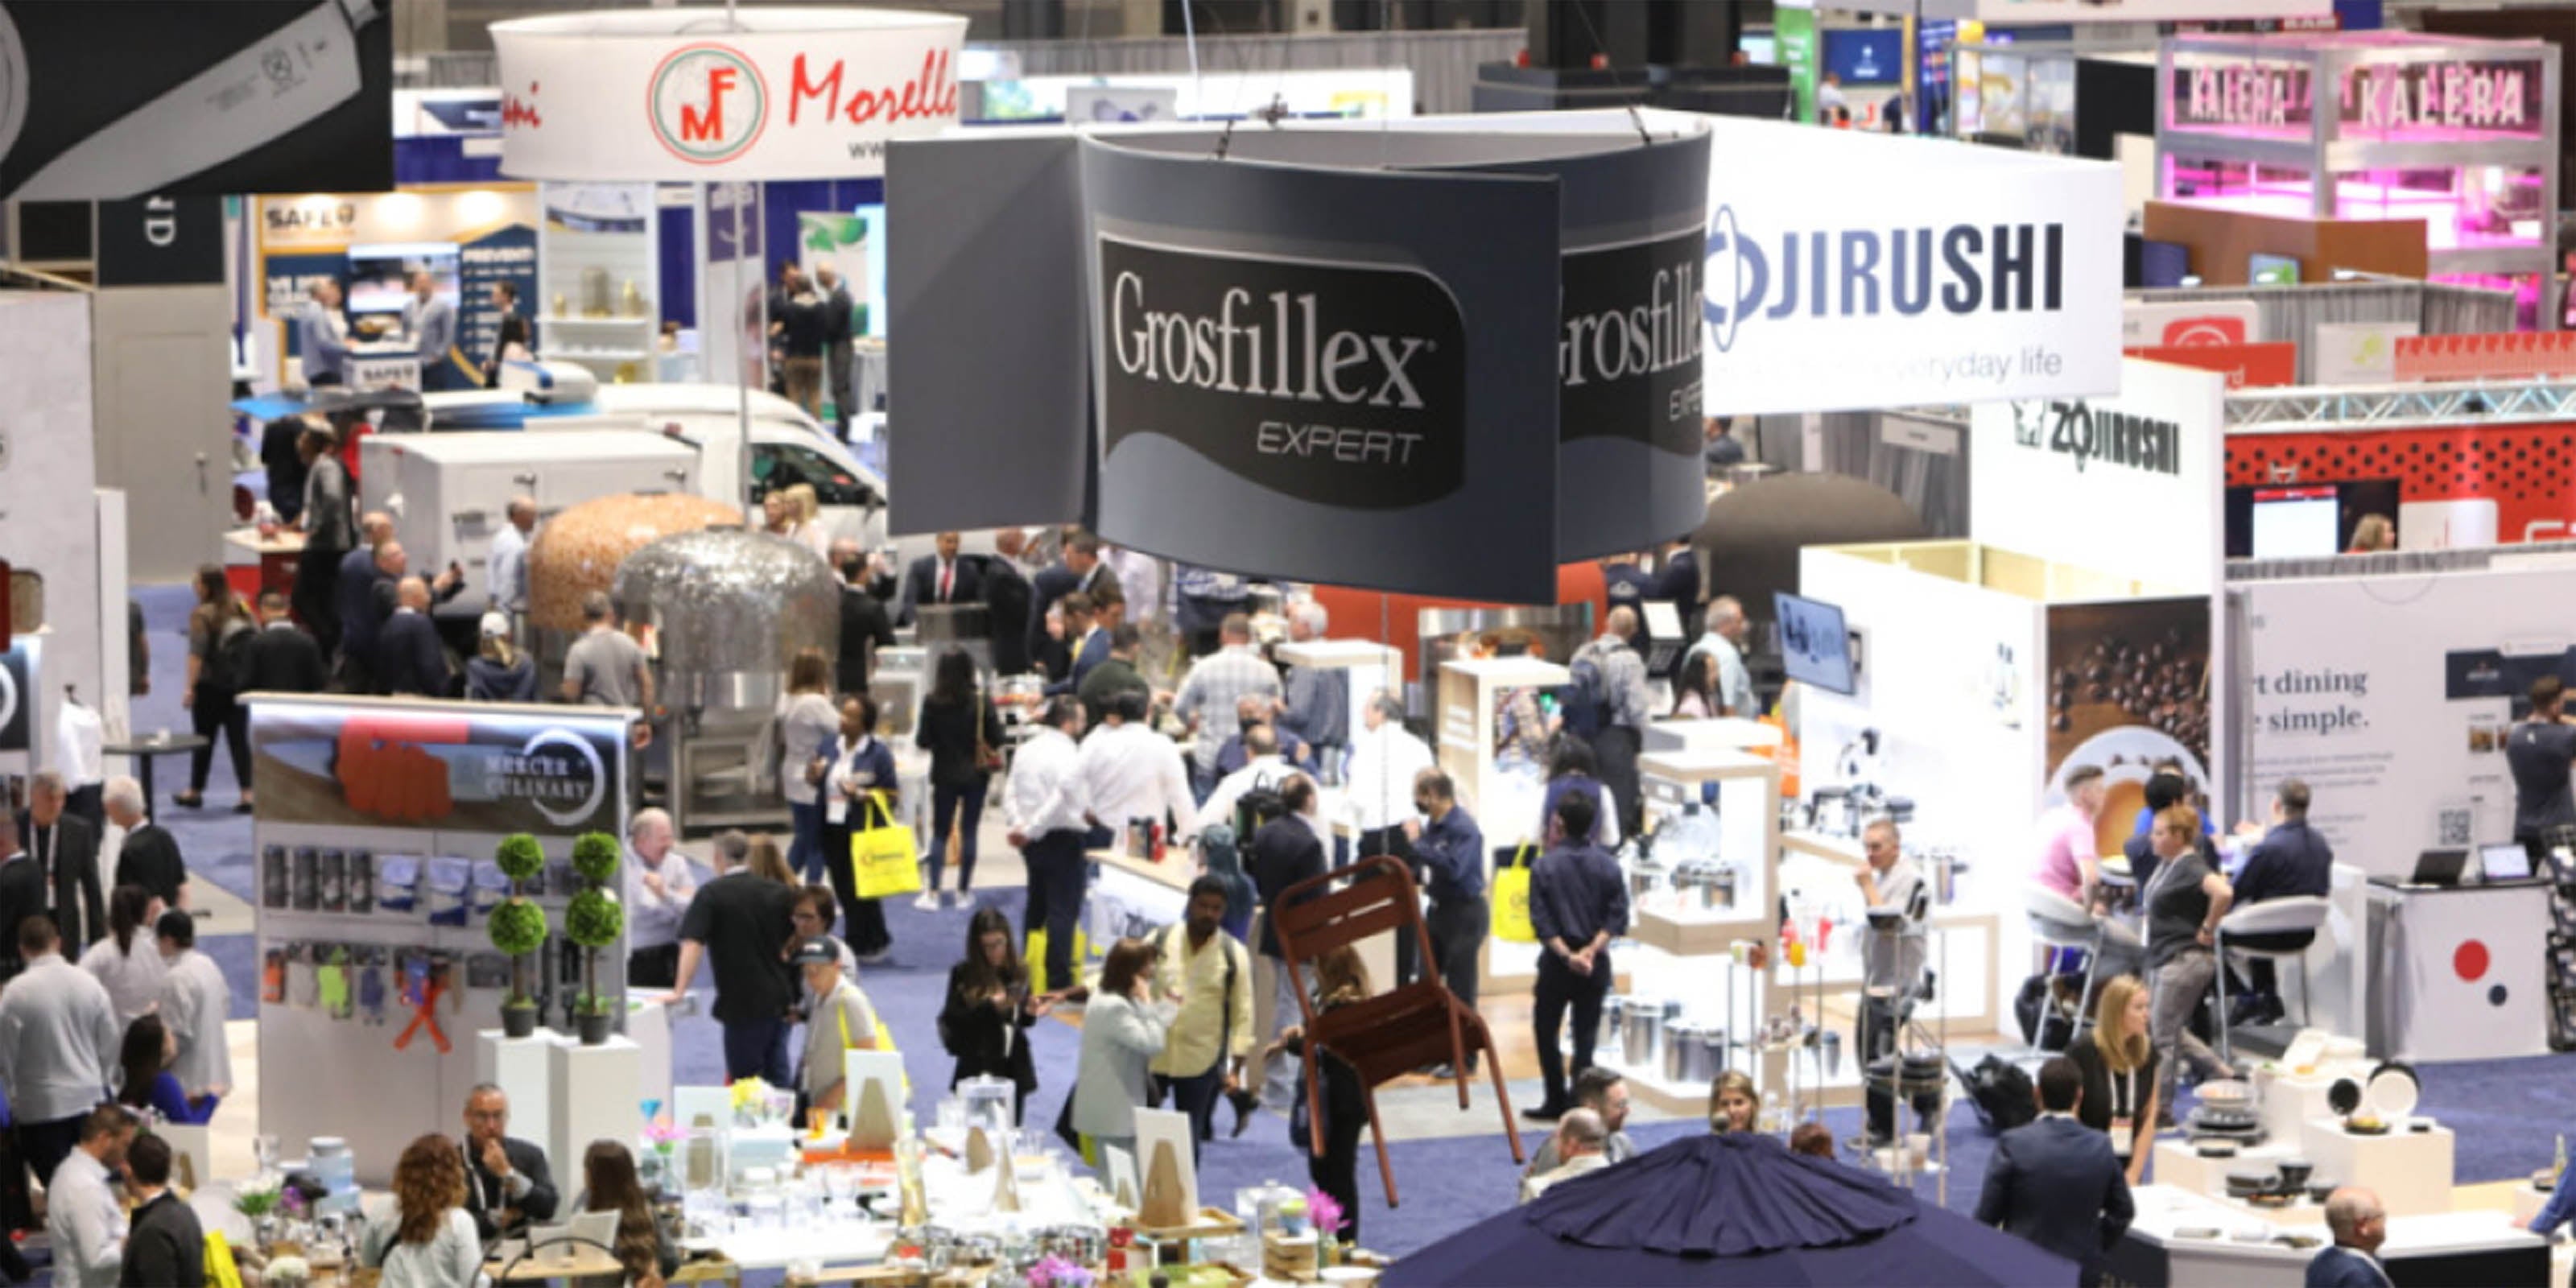 Photo of a Grosfillex booth from an areal view that overlooks the shows venue below it